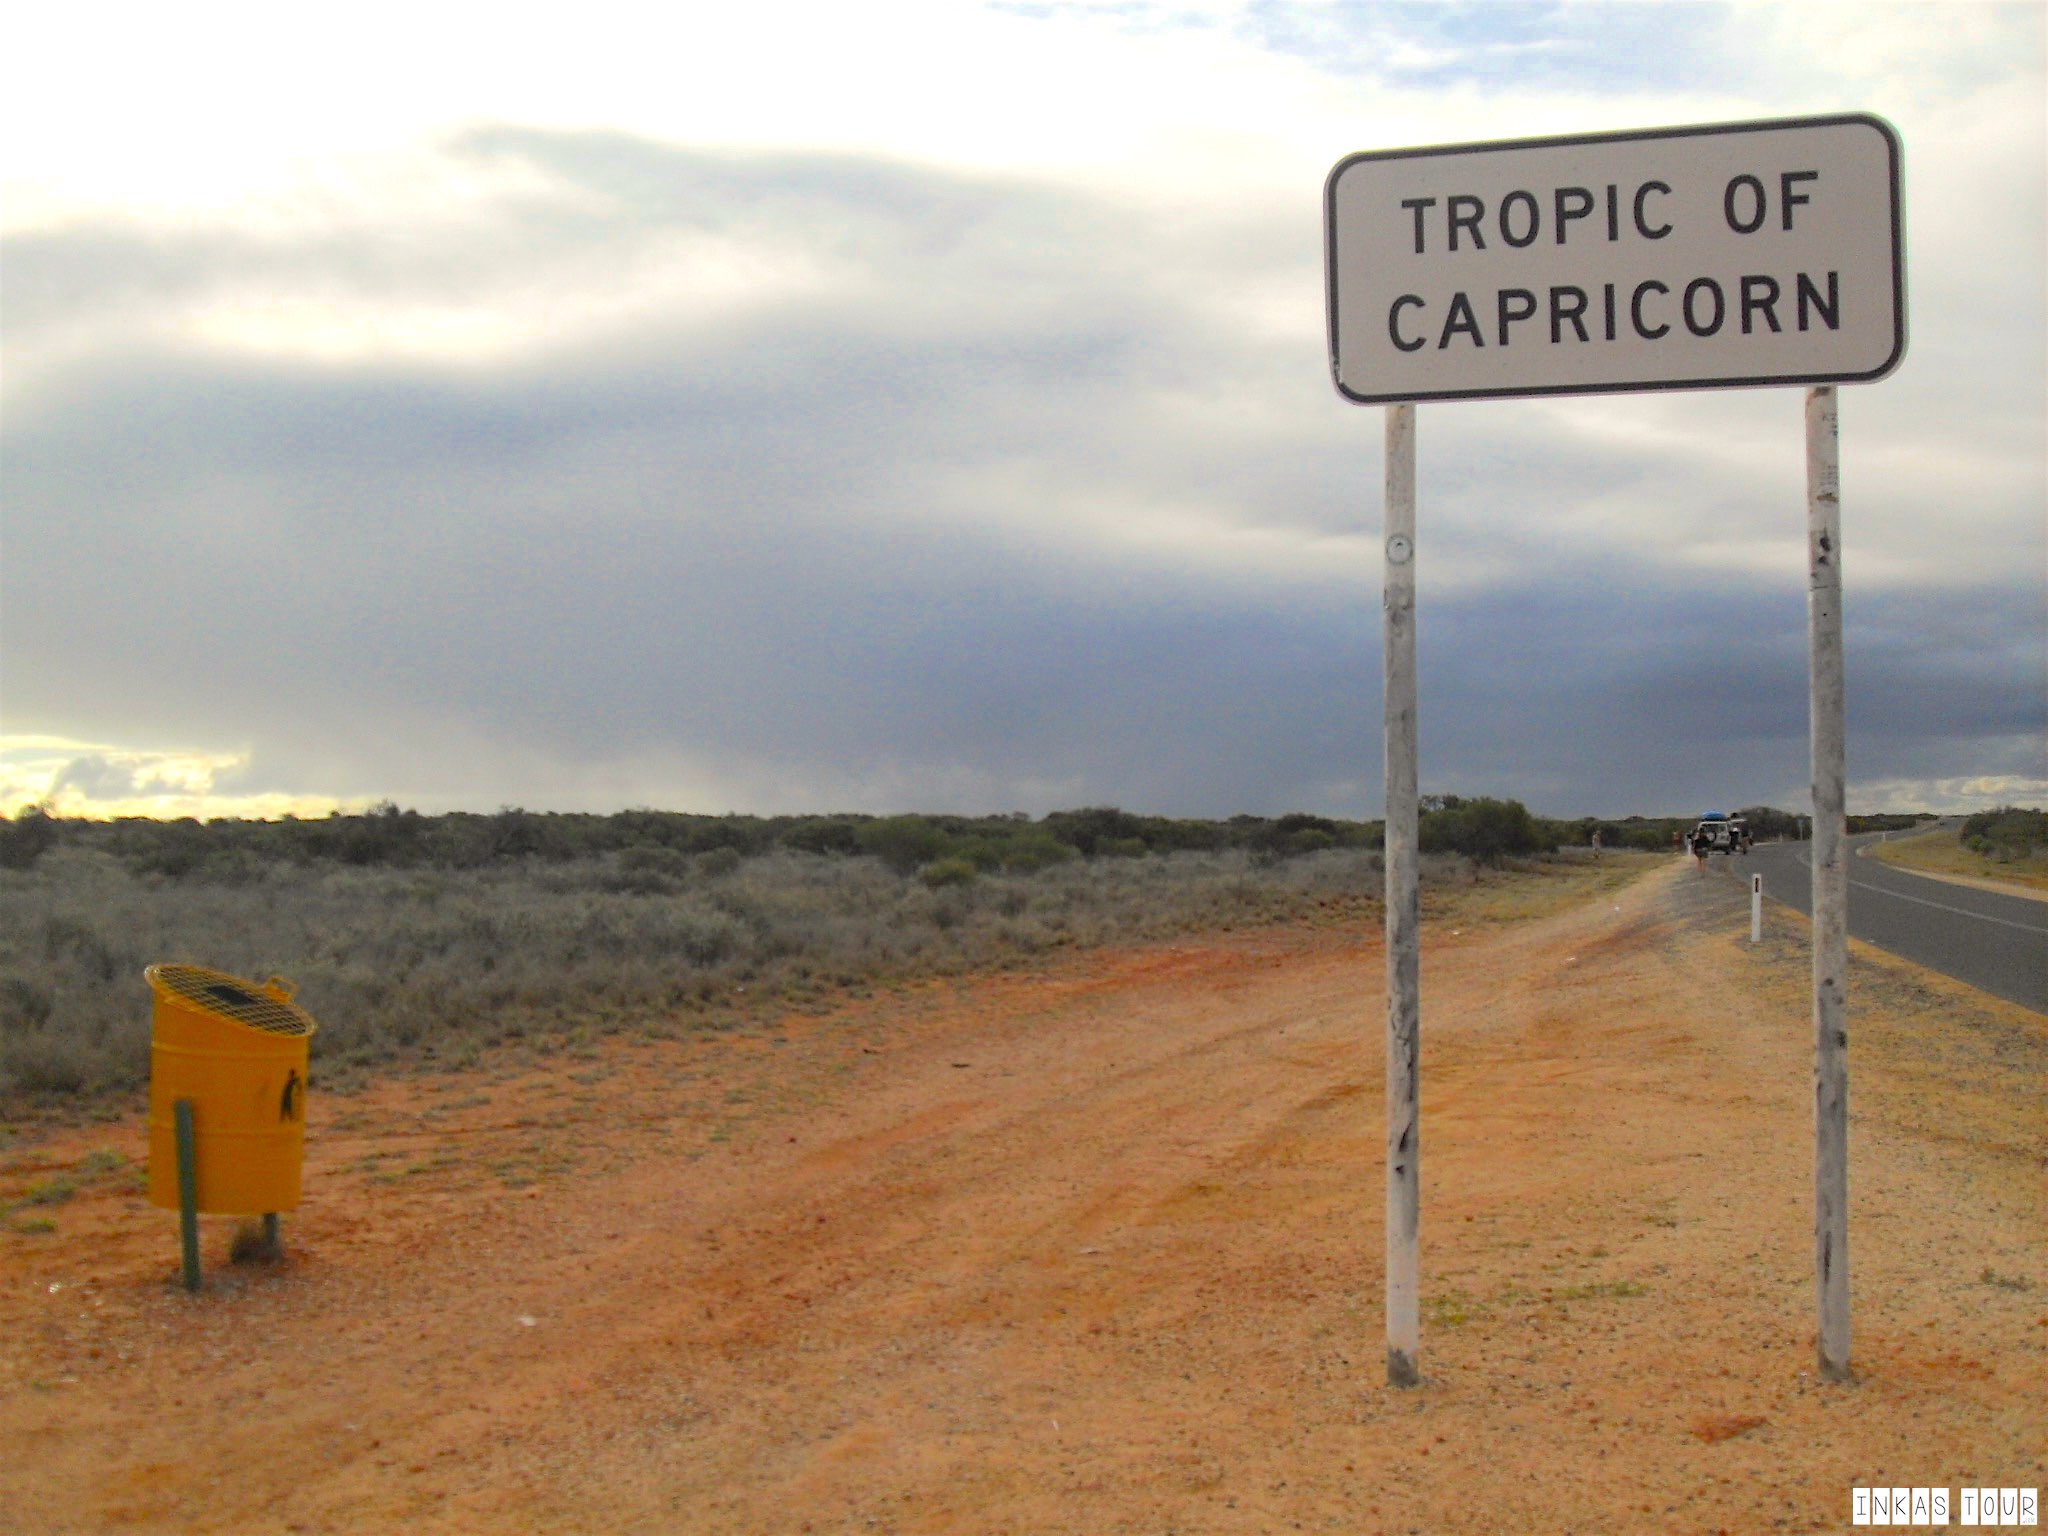 At the Tropic of Capricorn in Australia, is a Trash Can!!